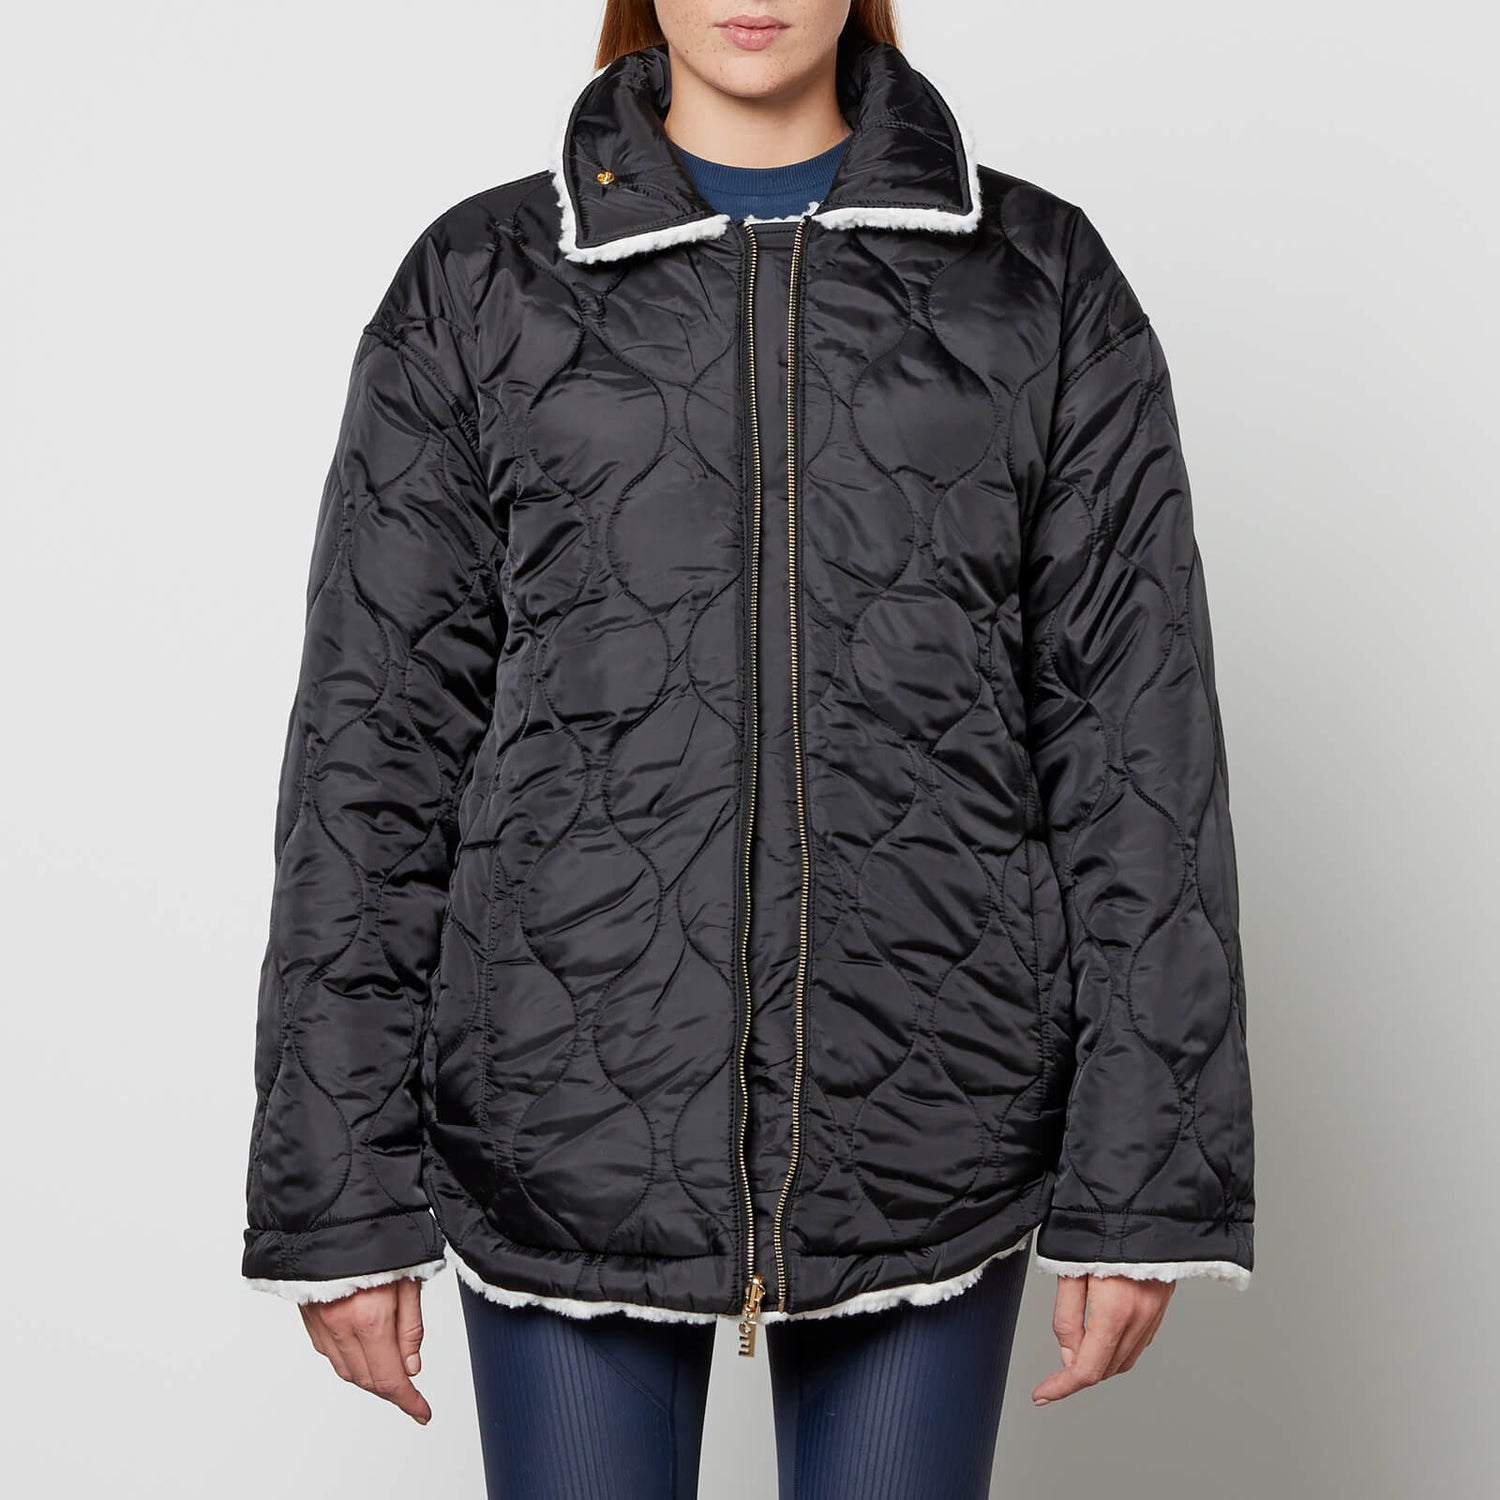 P.E Nation Outline Reversible Fleece and Quilted Shell Jacket - XS